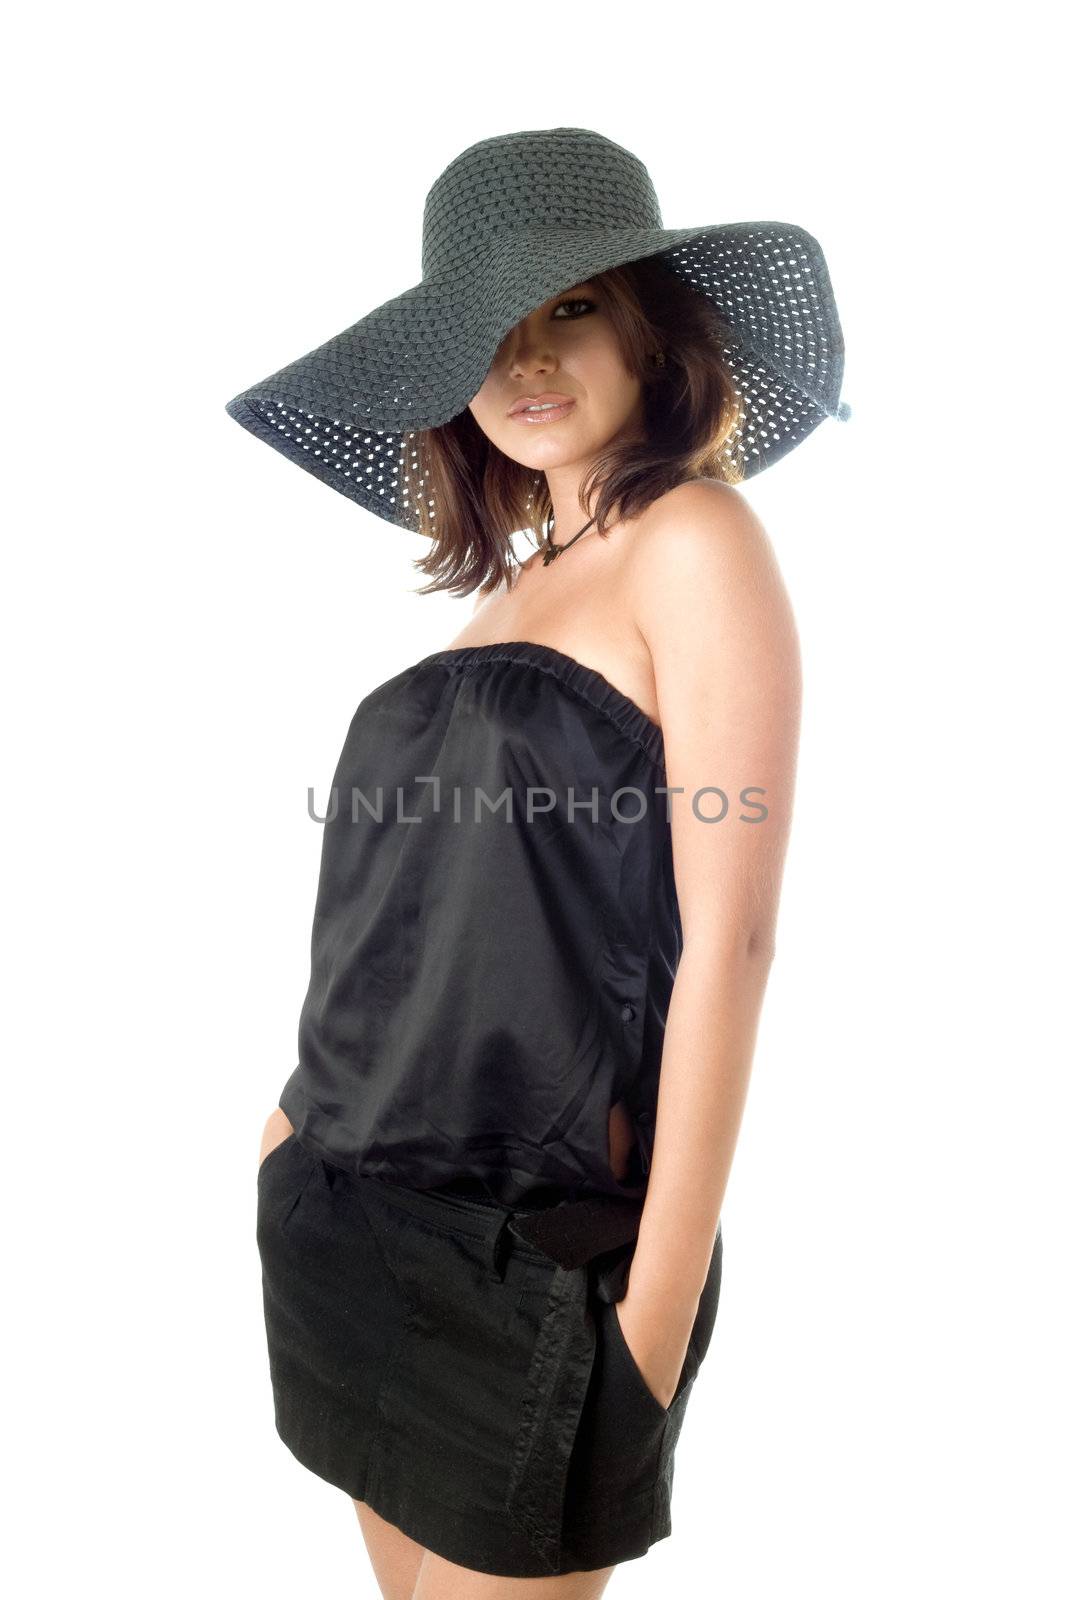 Sexy young woman posing in black dress and hat